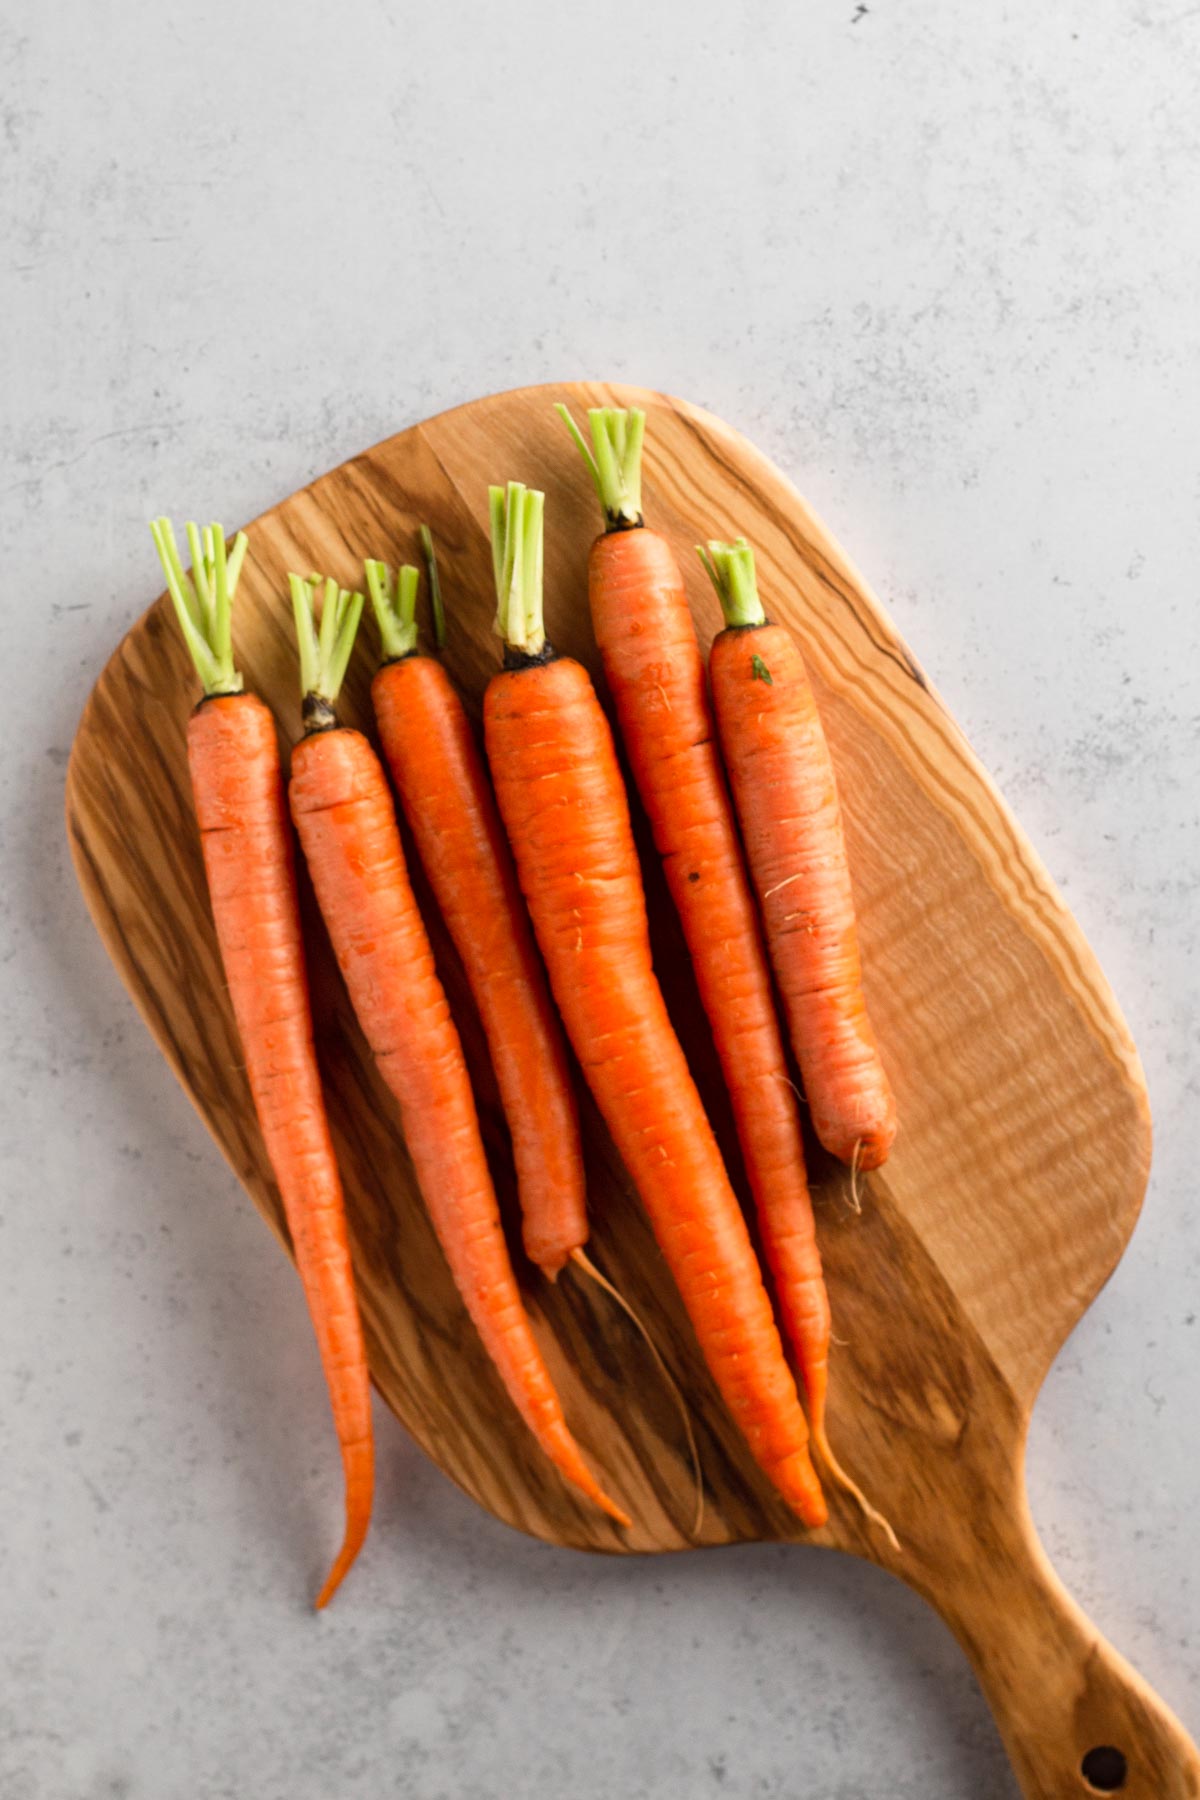 fresh carrots with stems trimmed on a wooden cutting board